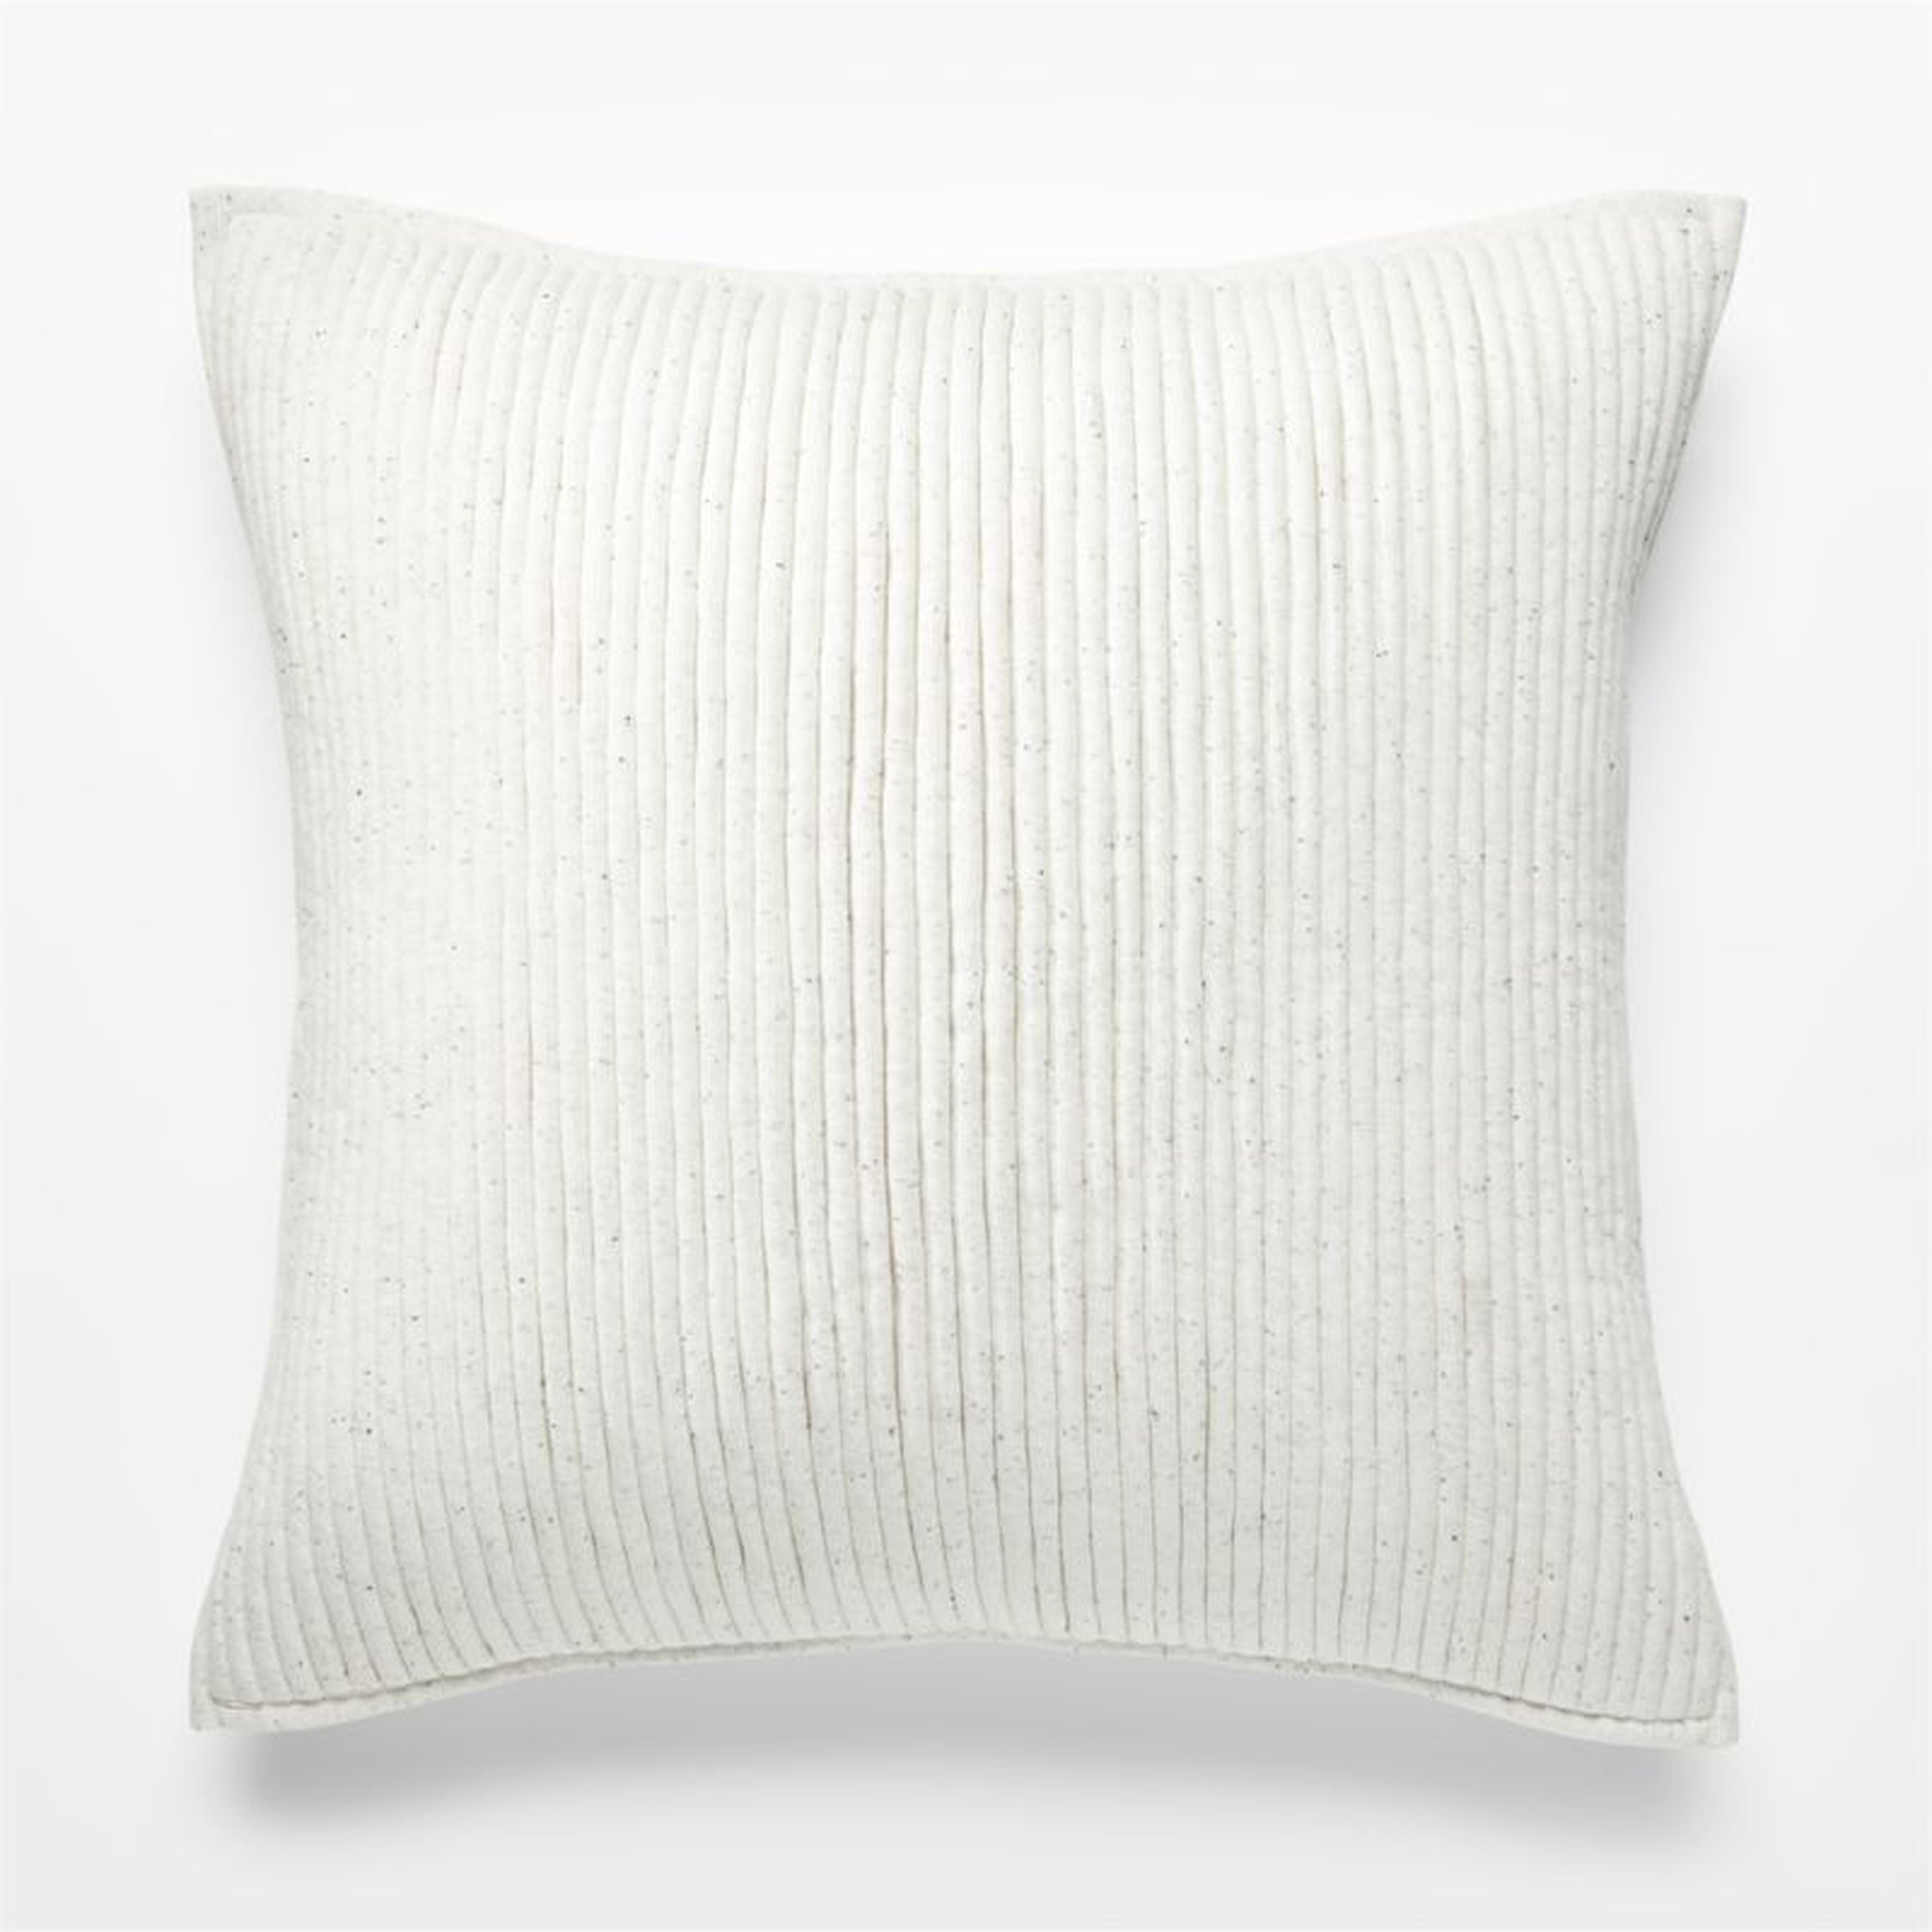 Sequence Jersey Ivory Pillow, Ivory, 20" x 20" - CB2